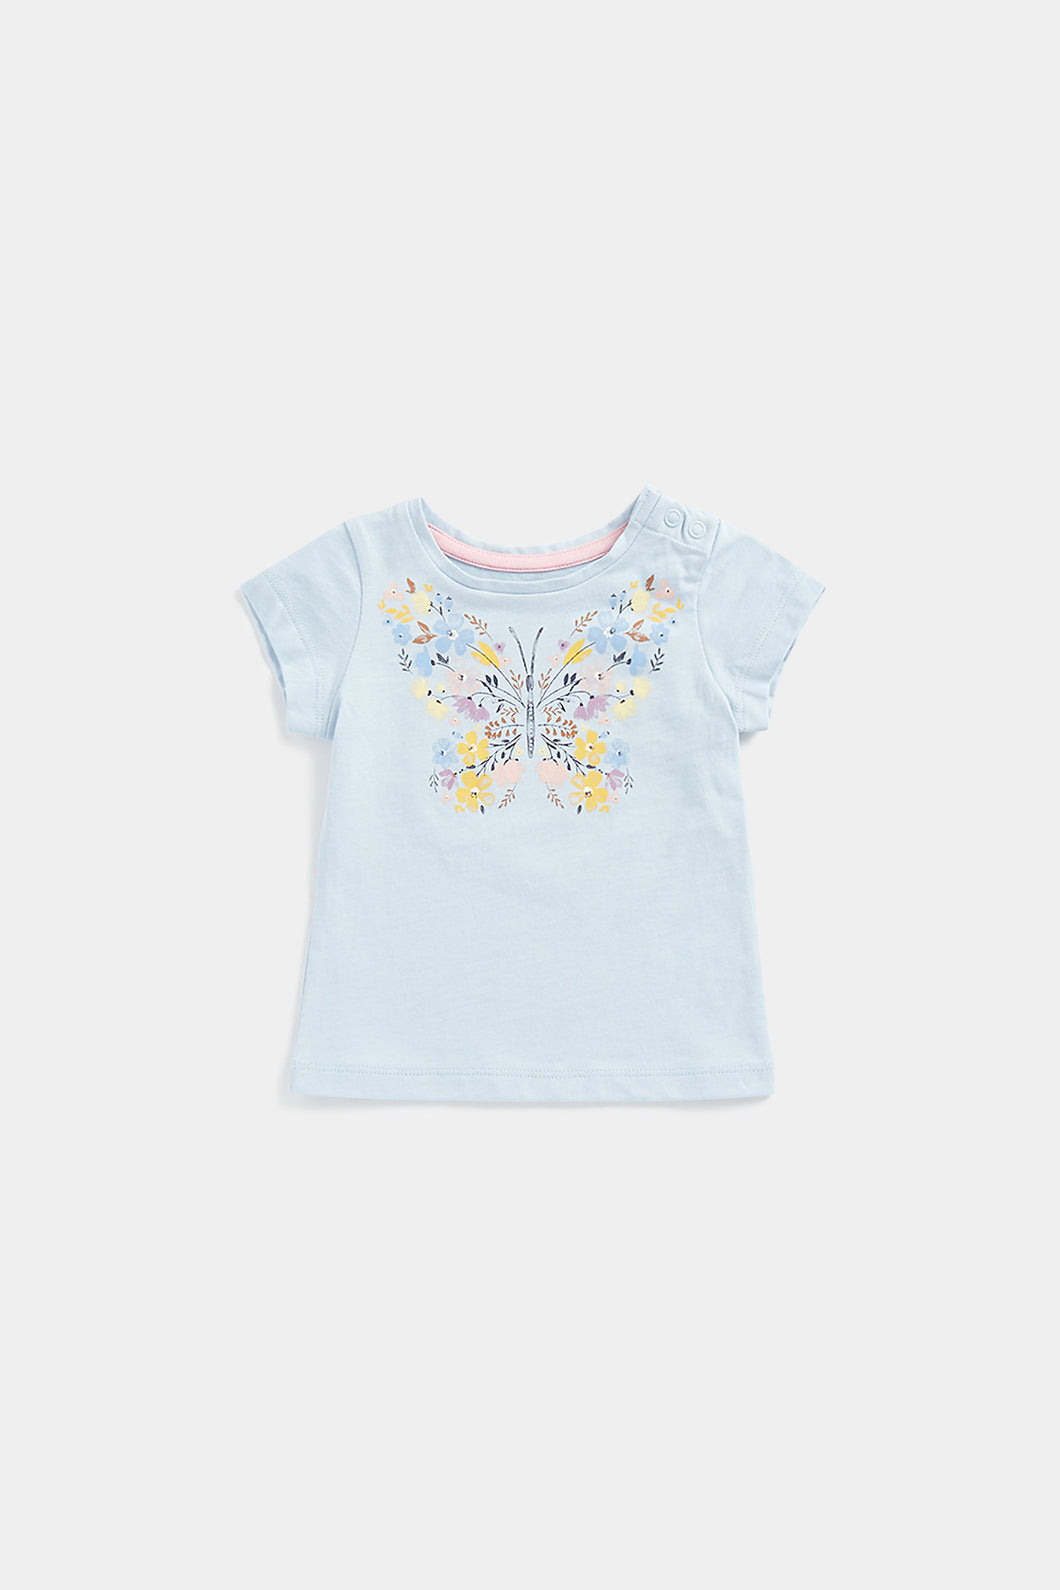 Mothercare Butterfly T-Shirt